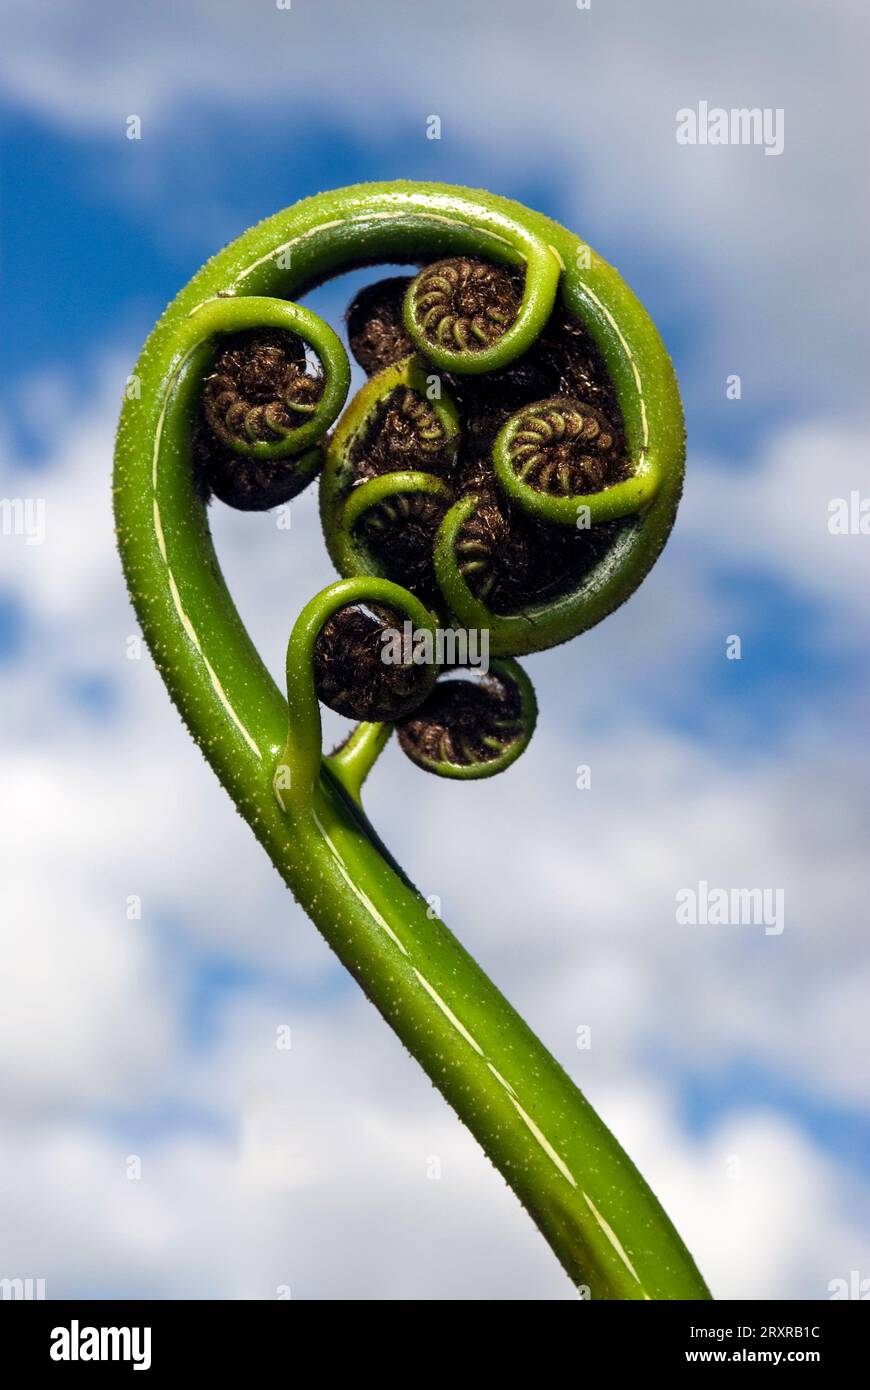 New shoot of fern frond on New Zealand tree fern. The koru (Māori for 'loop or coil') is a spiral shape based on the new unfurling frond Stock Photo